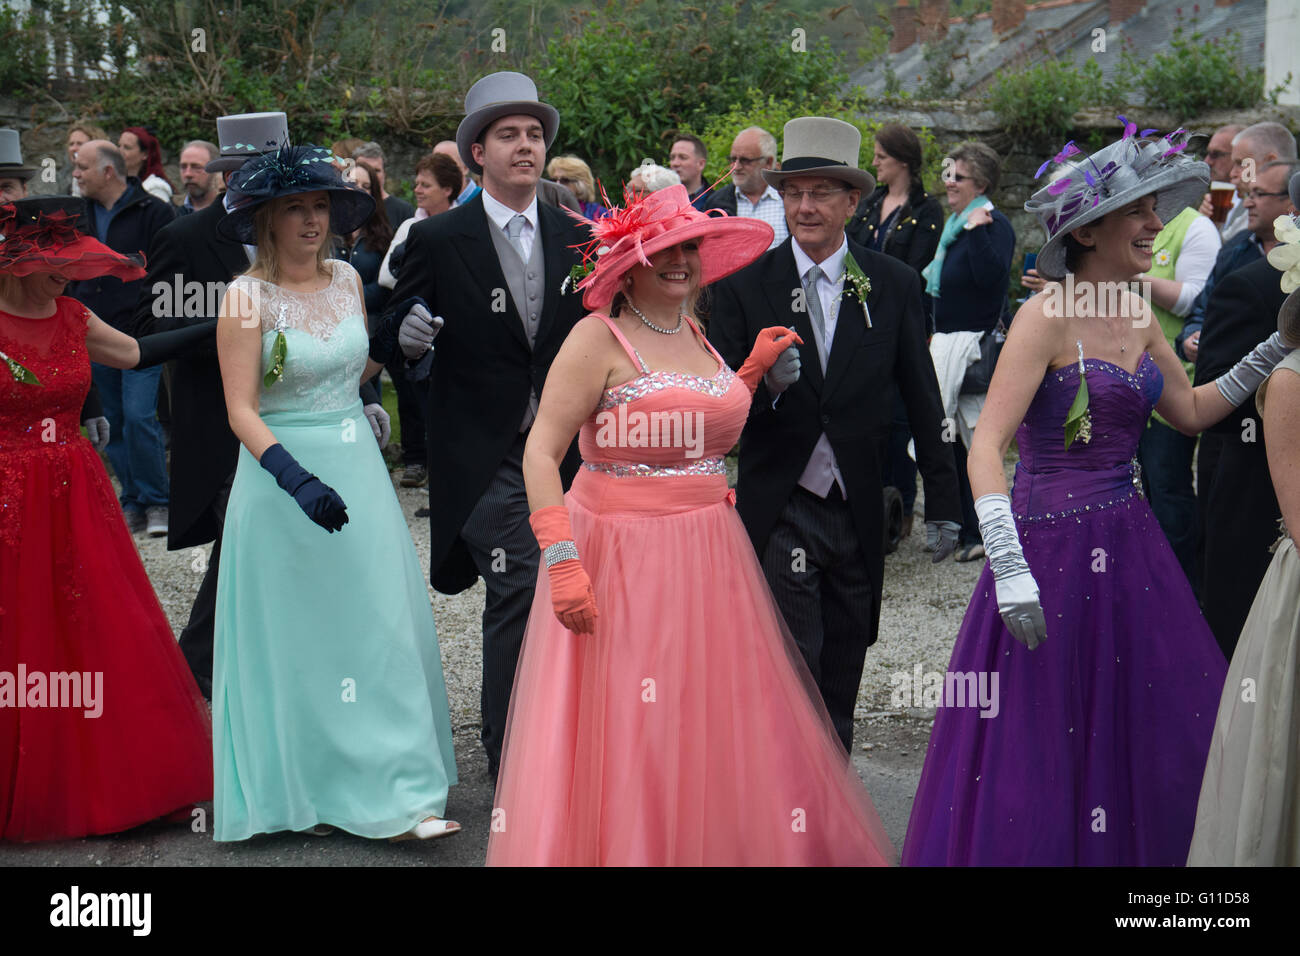 Helson, Cornwall, UK. 7th May 2016. Some eighty couples dance through the streets of Helston, entering selected houses and shops to drive out the darkness of winter and bring in the light of spring. The music to the Furry dance is played by Helston Town band, was made into a vocal version 'The floral dance' by the late Sir Terry Wogan. The colourful Pageant, known as Hal an Tow, tells the history of Helston with the participating characters singing about the challenge of the Spanish Armada, the English patron saint, St. Credit:  Simon Maycock/Alamy Live News Stock Photo